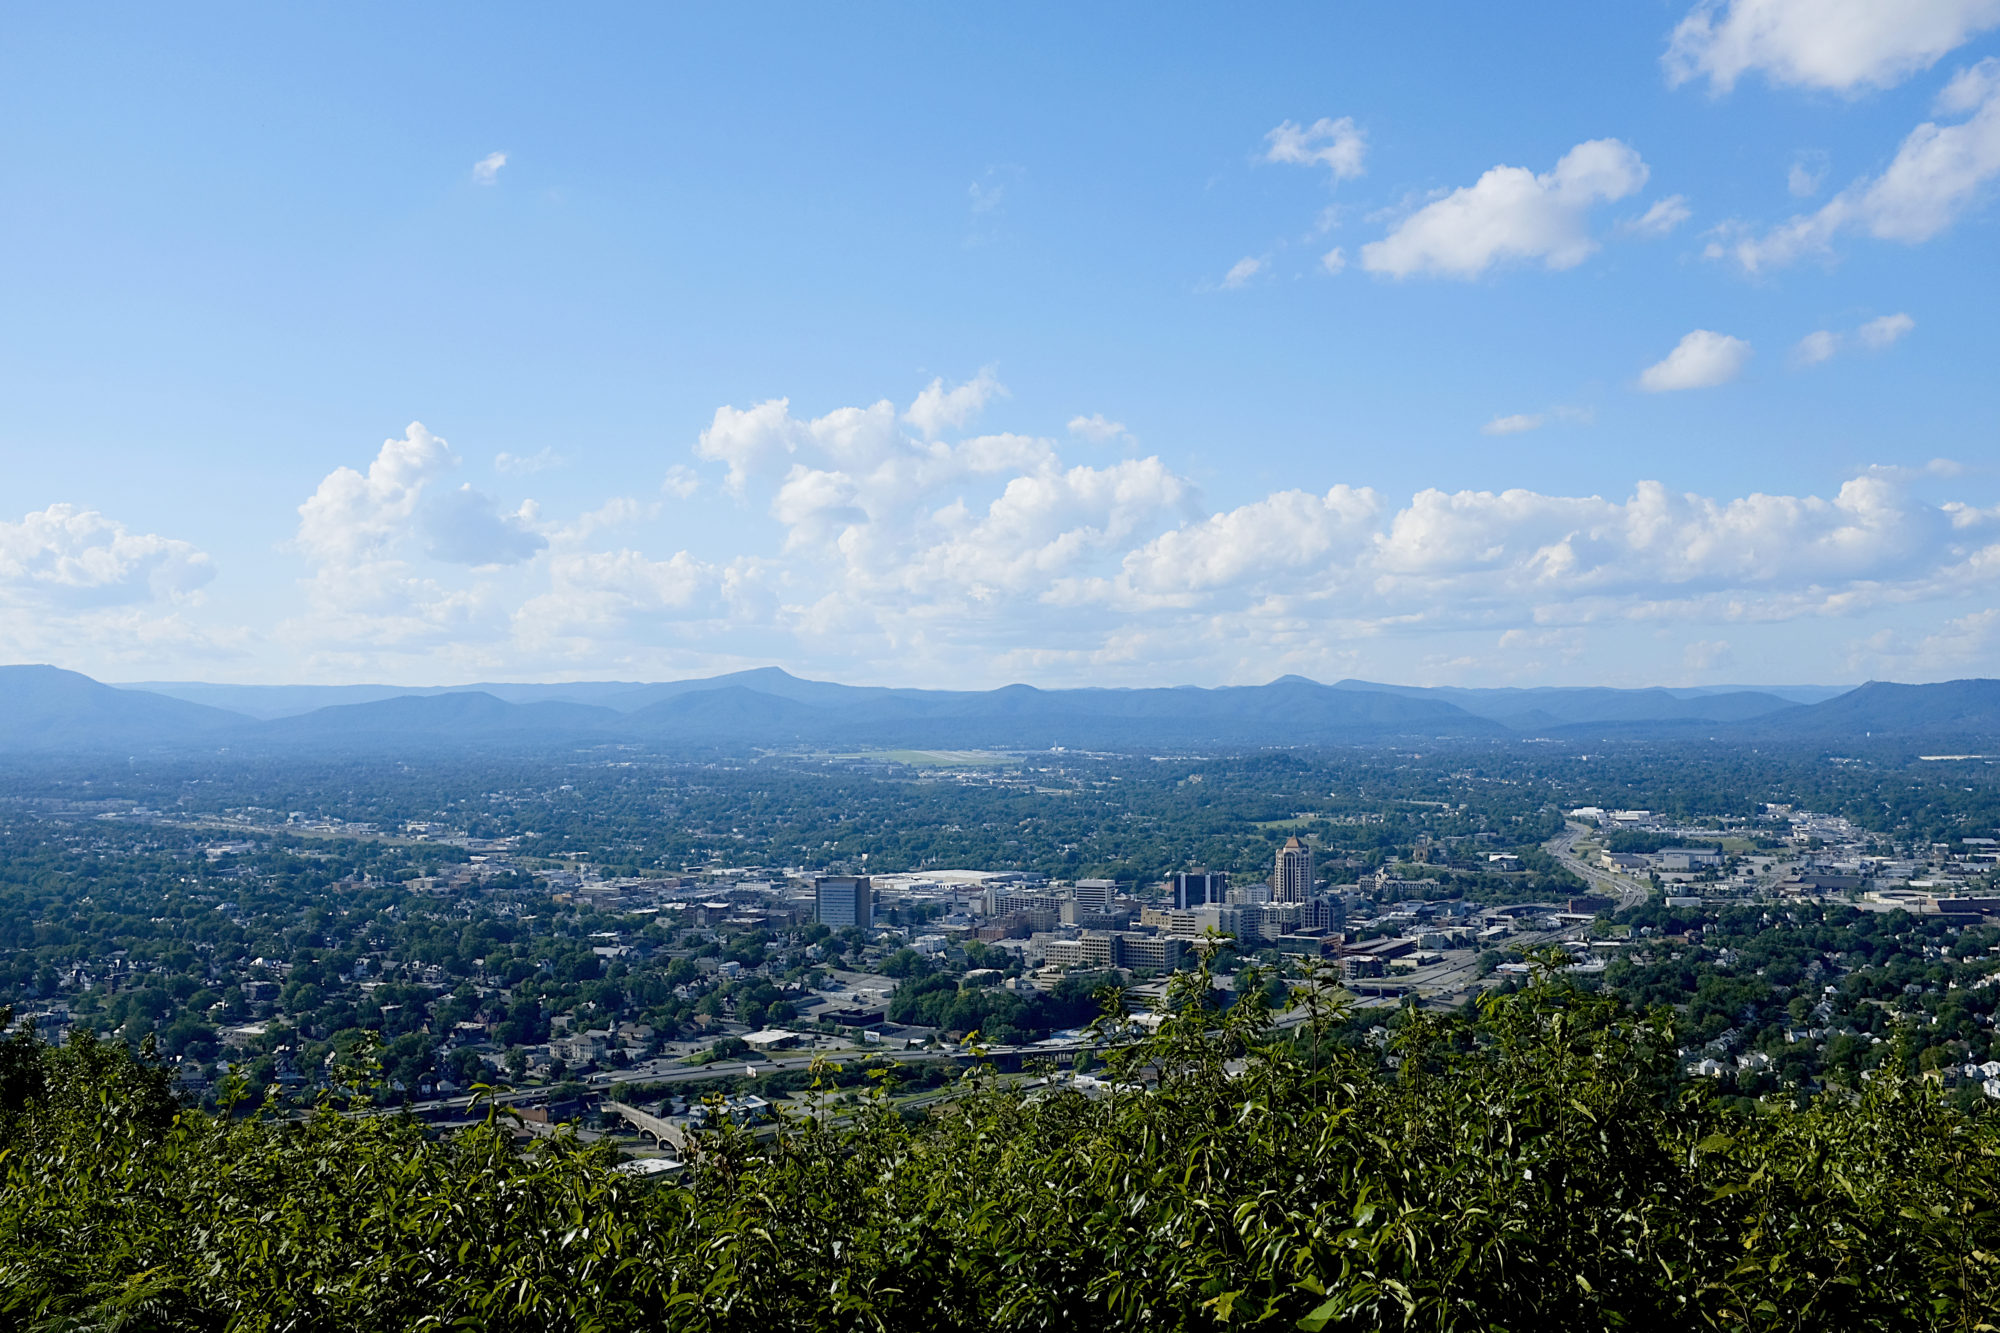 View of Roanoke from Mill Mountain Star